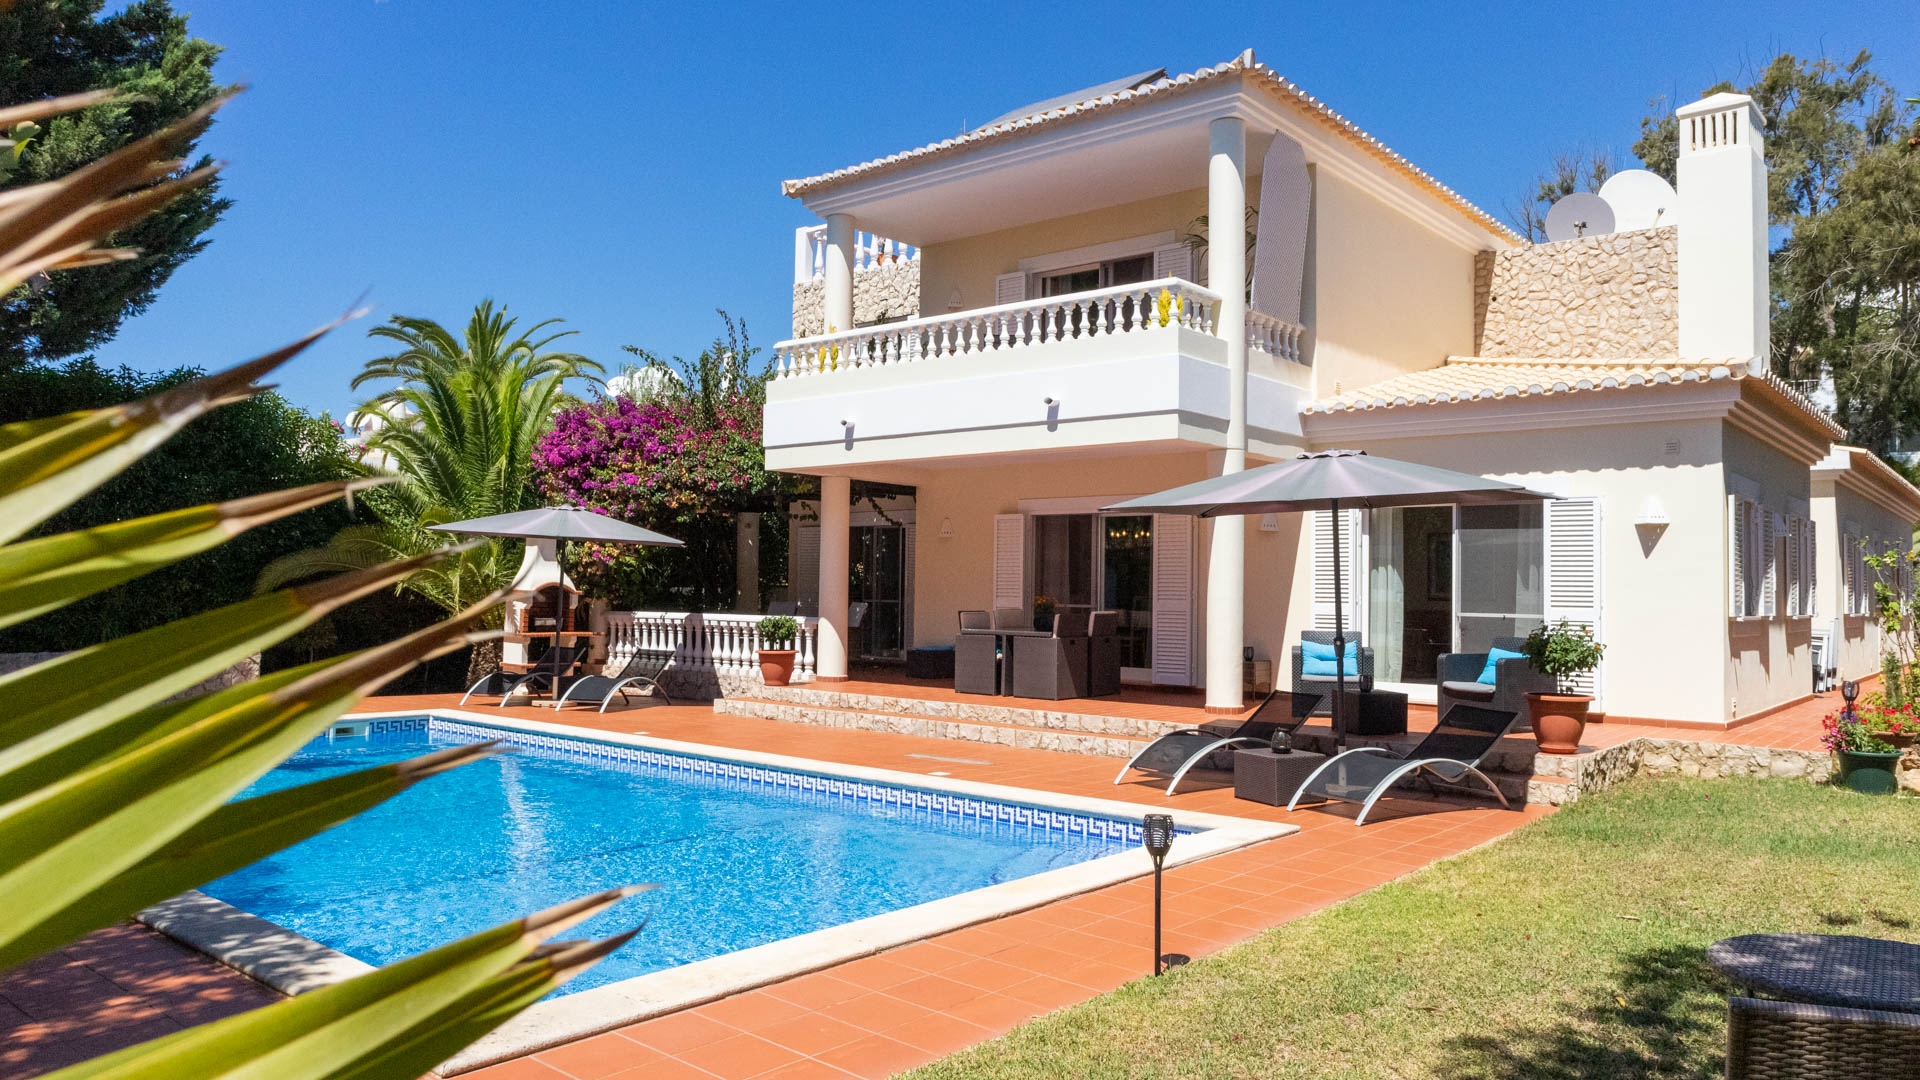 Beautiful 3+1 bedroom Villa with large pool and sea views from the roof terrace, Carvoeiro | VM770 3+1 bedroom villa with pool and sea views from the roof terrace in Carvoeiro. The villa is in an excellent location, close to beaches, golf courses and all amenities.